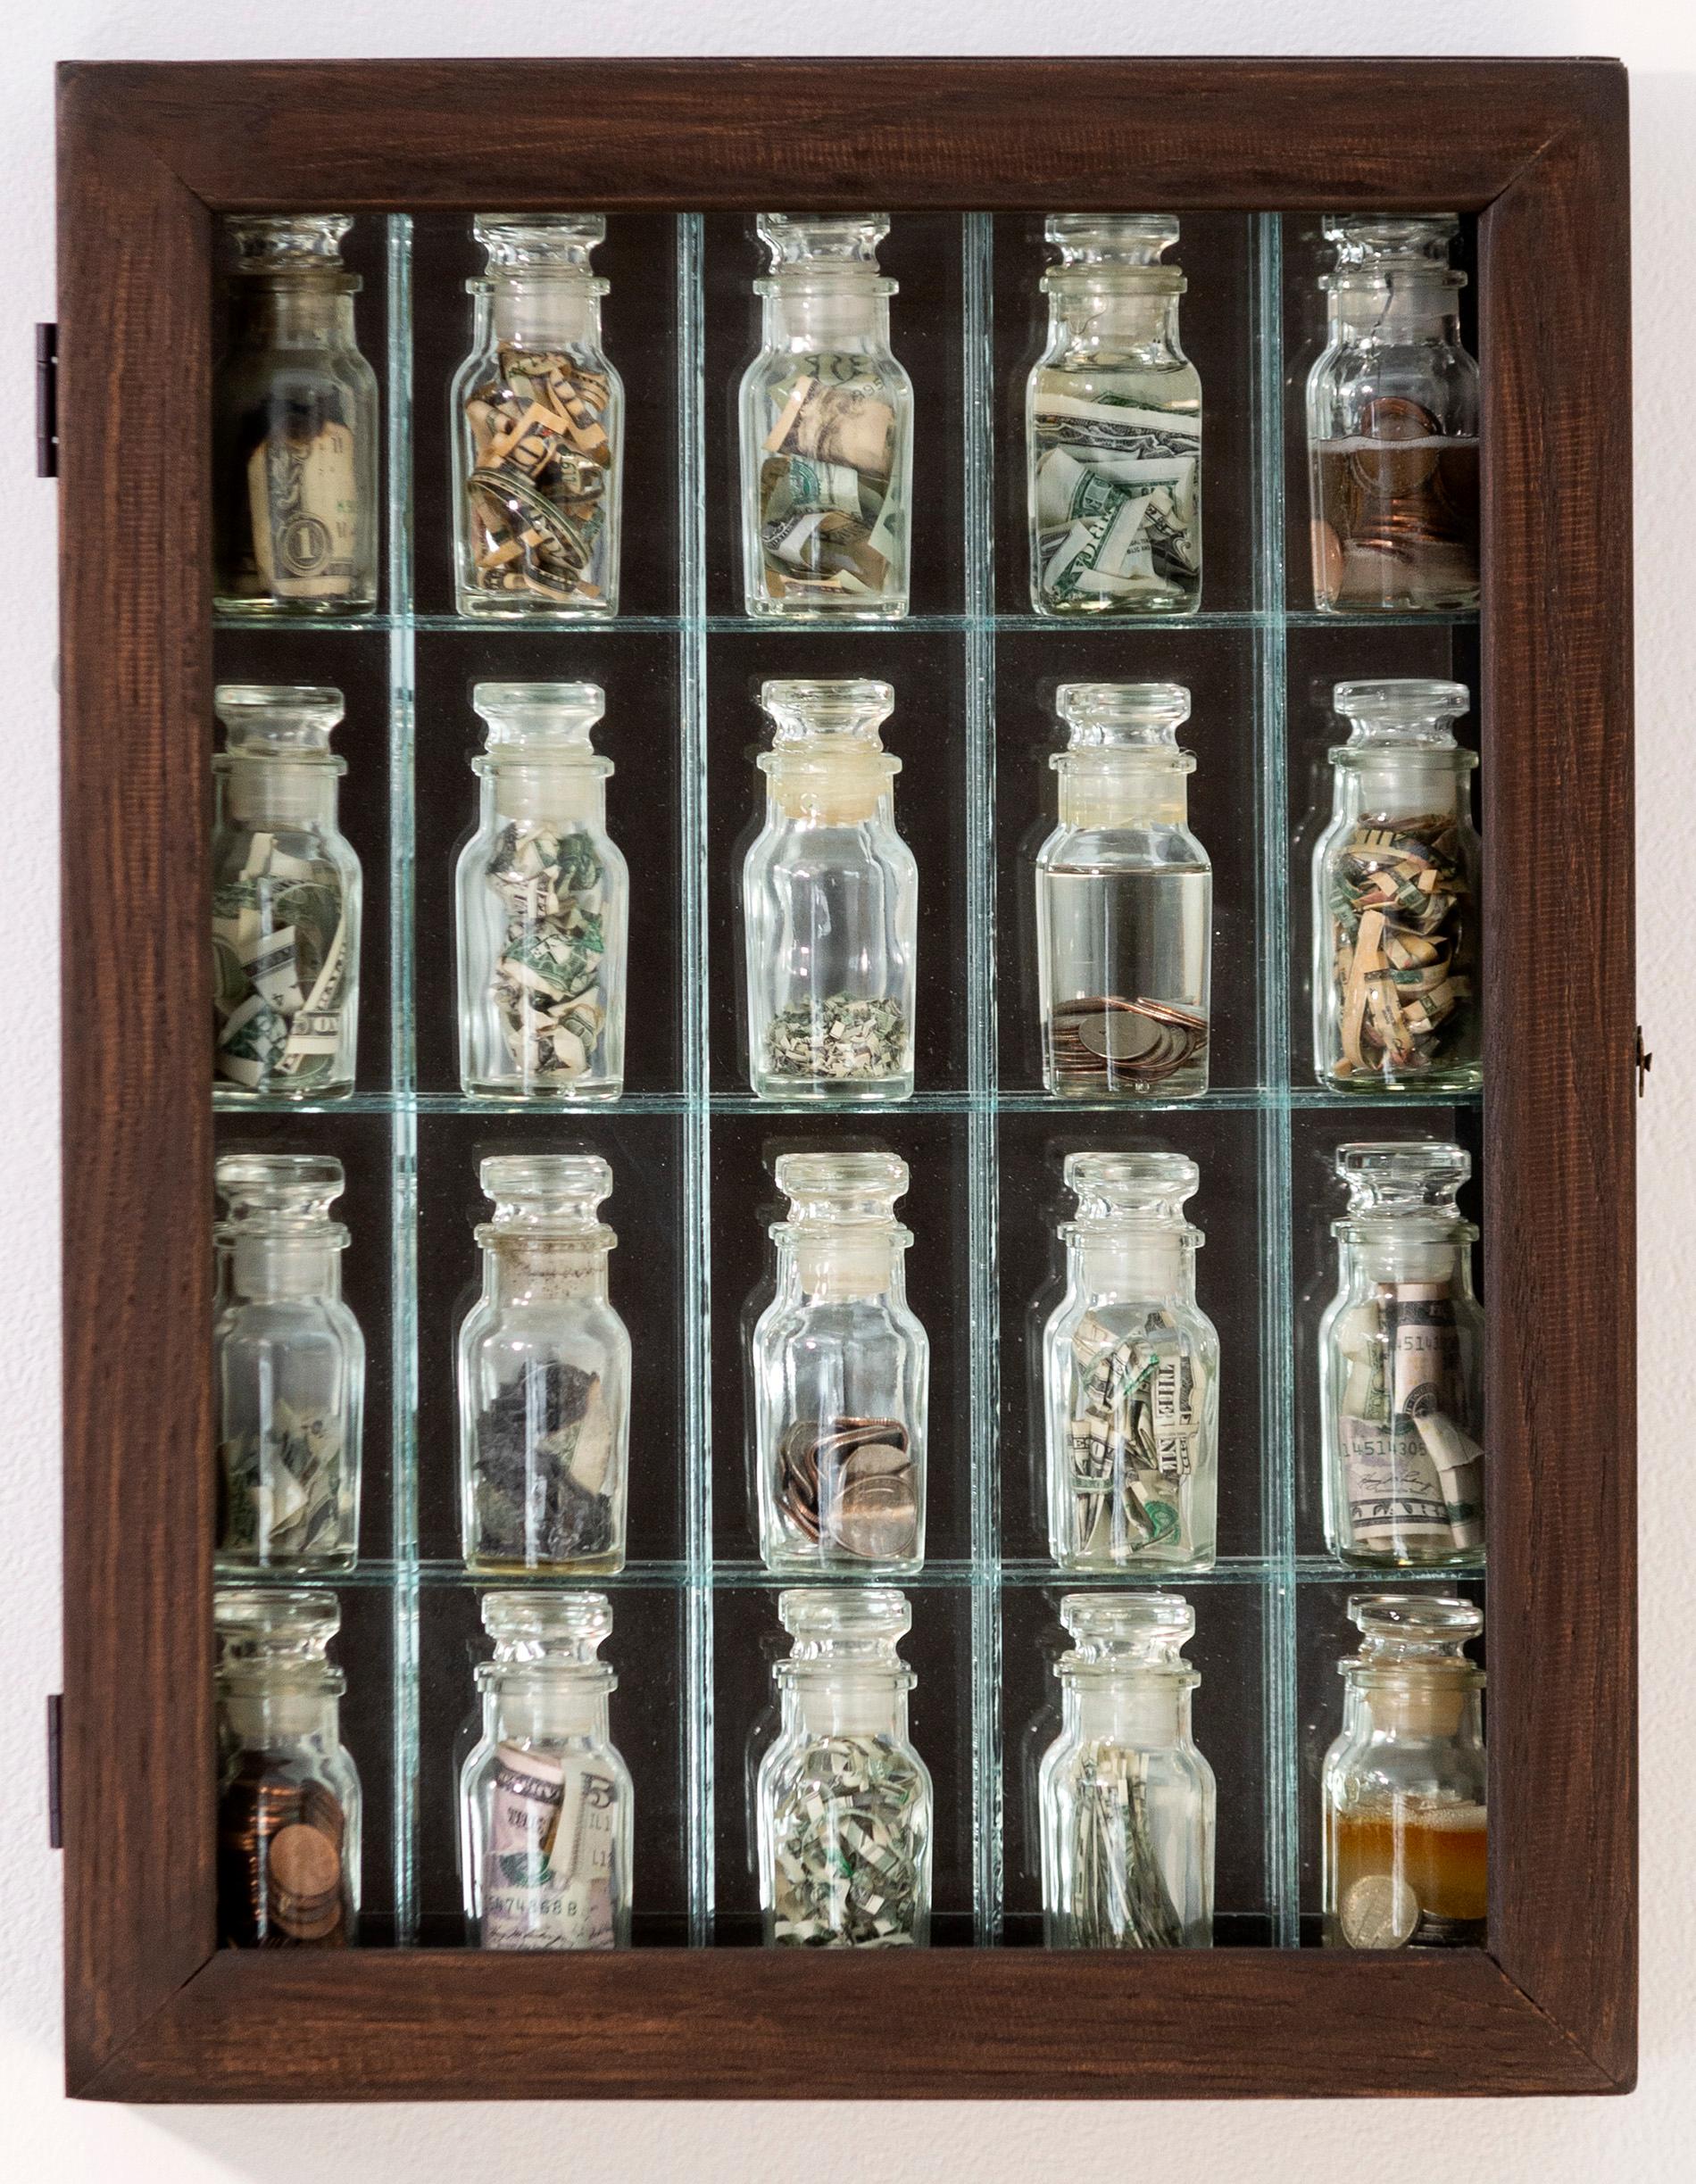 Stimulus Package - cabinet, bottles, money, mixed media, wall sculpture - Mixed Media Art by Raymond Waters